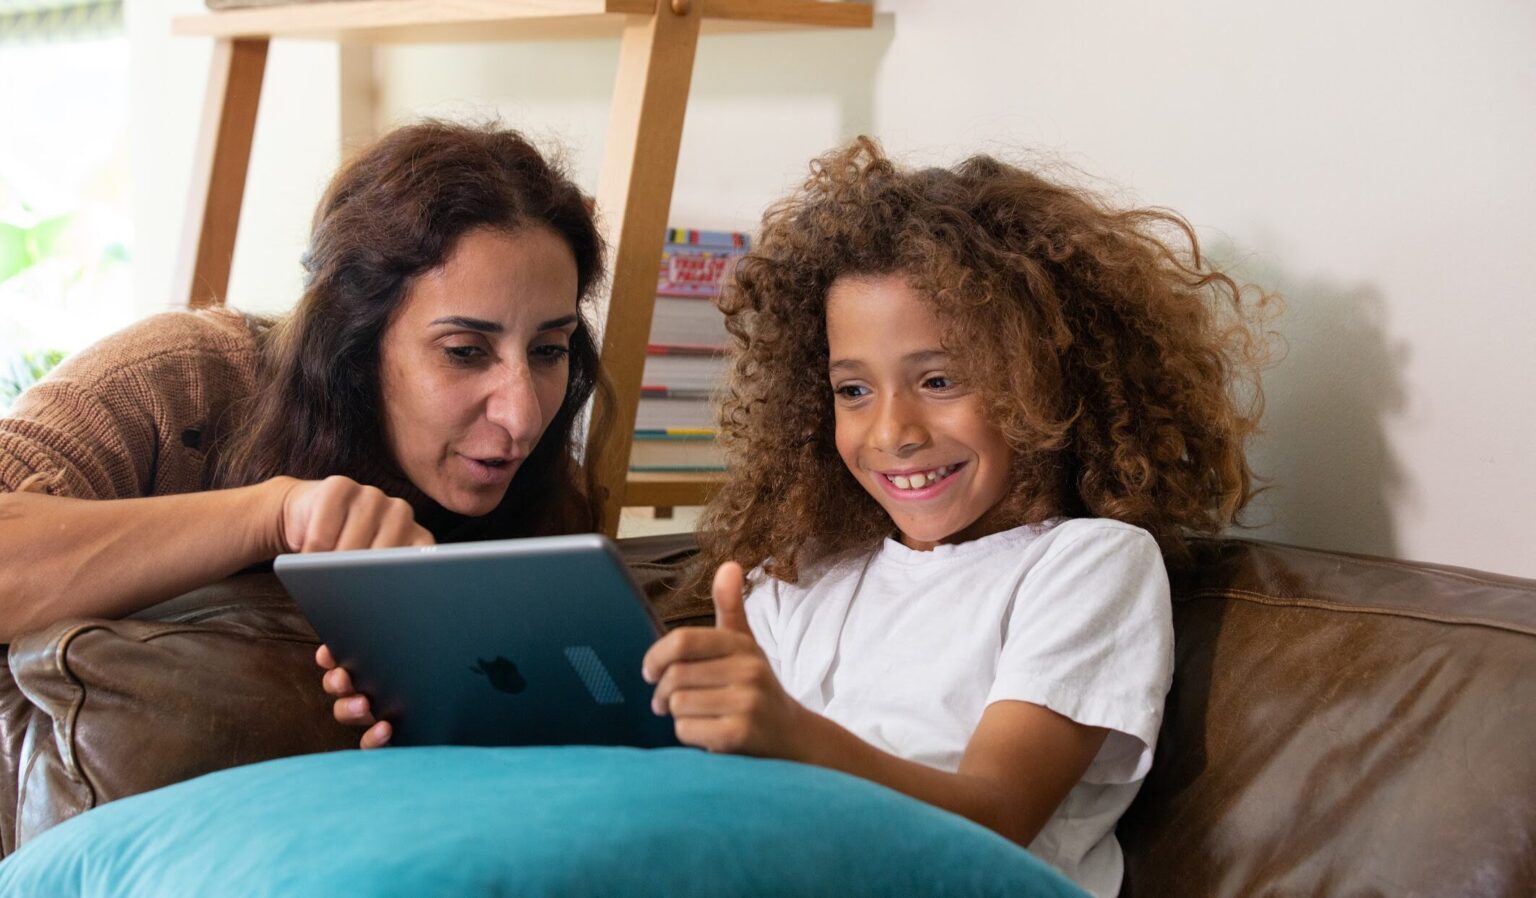 mother showing her daughter something on an ipad